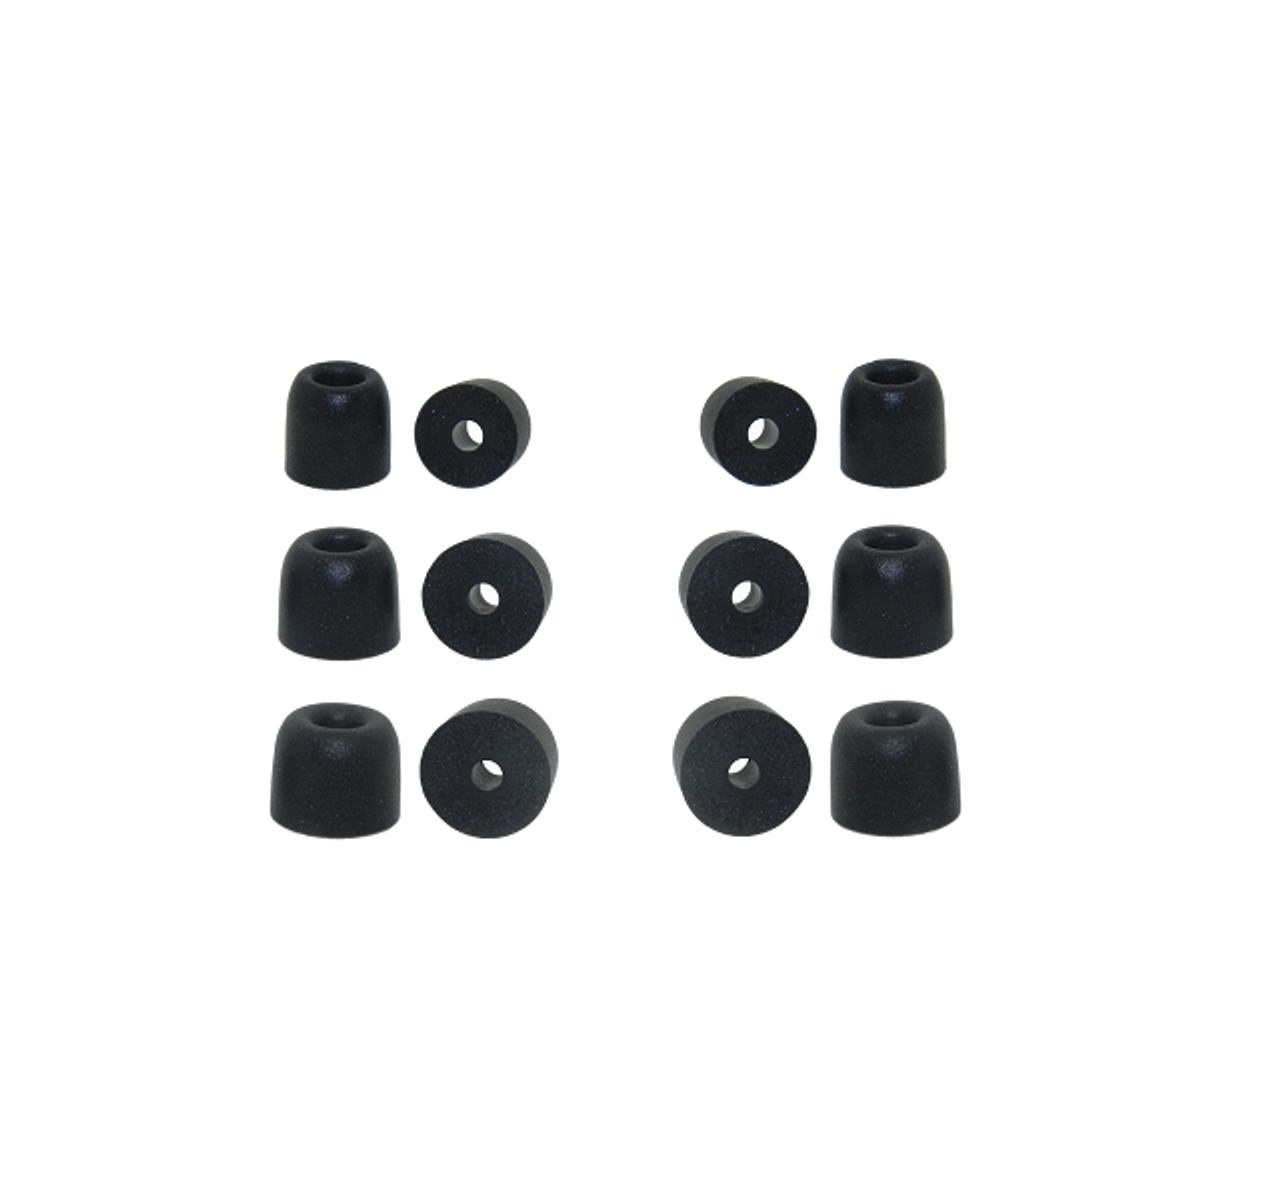 comparable to comply foam tips t-100 memory foam earbuds